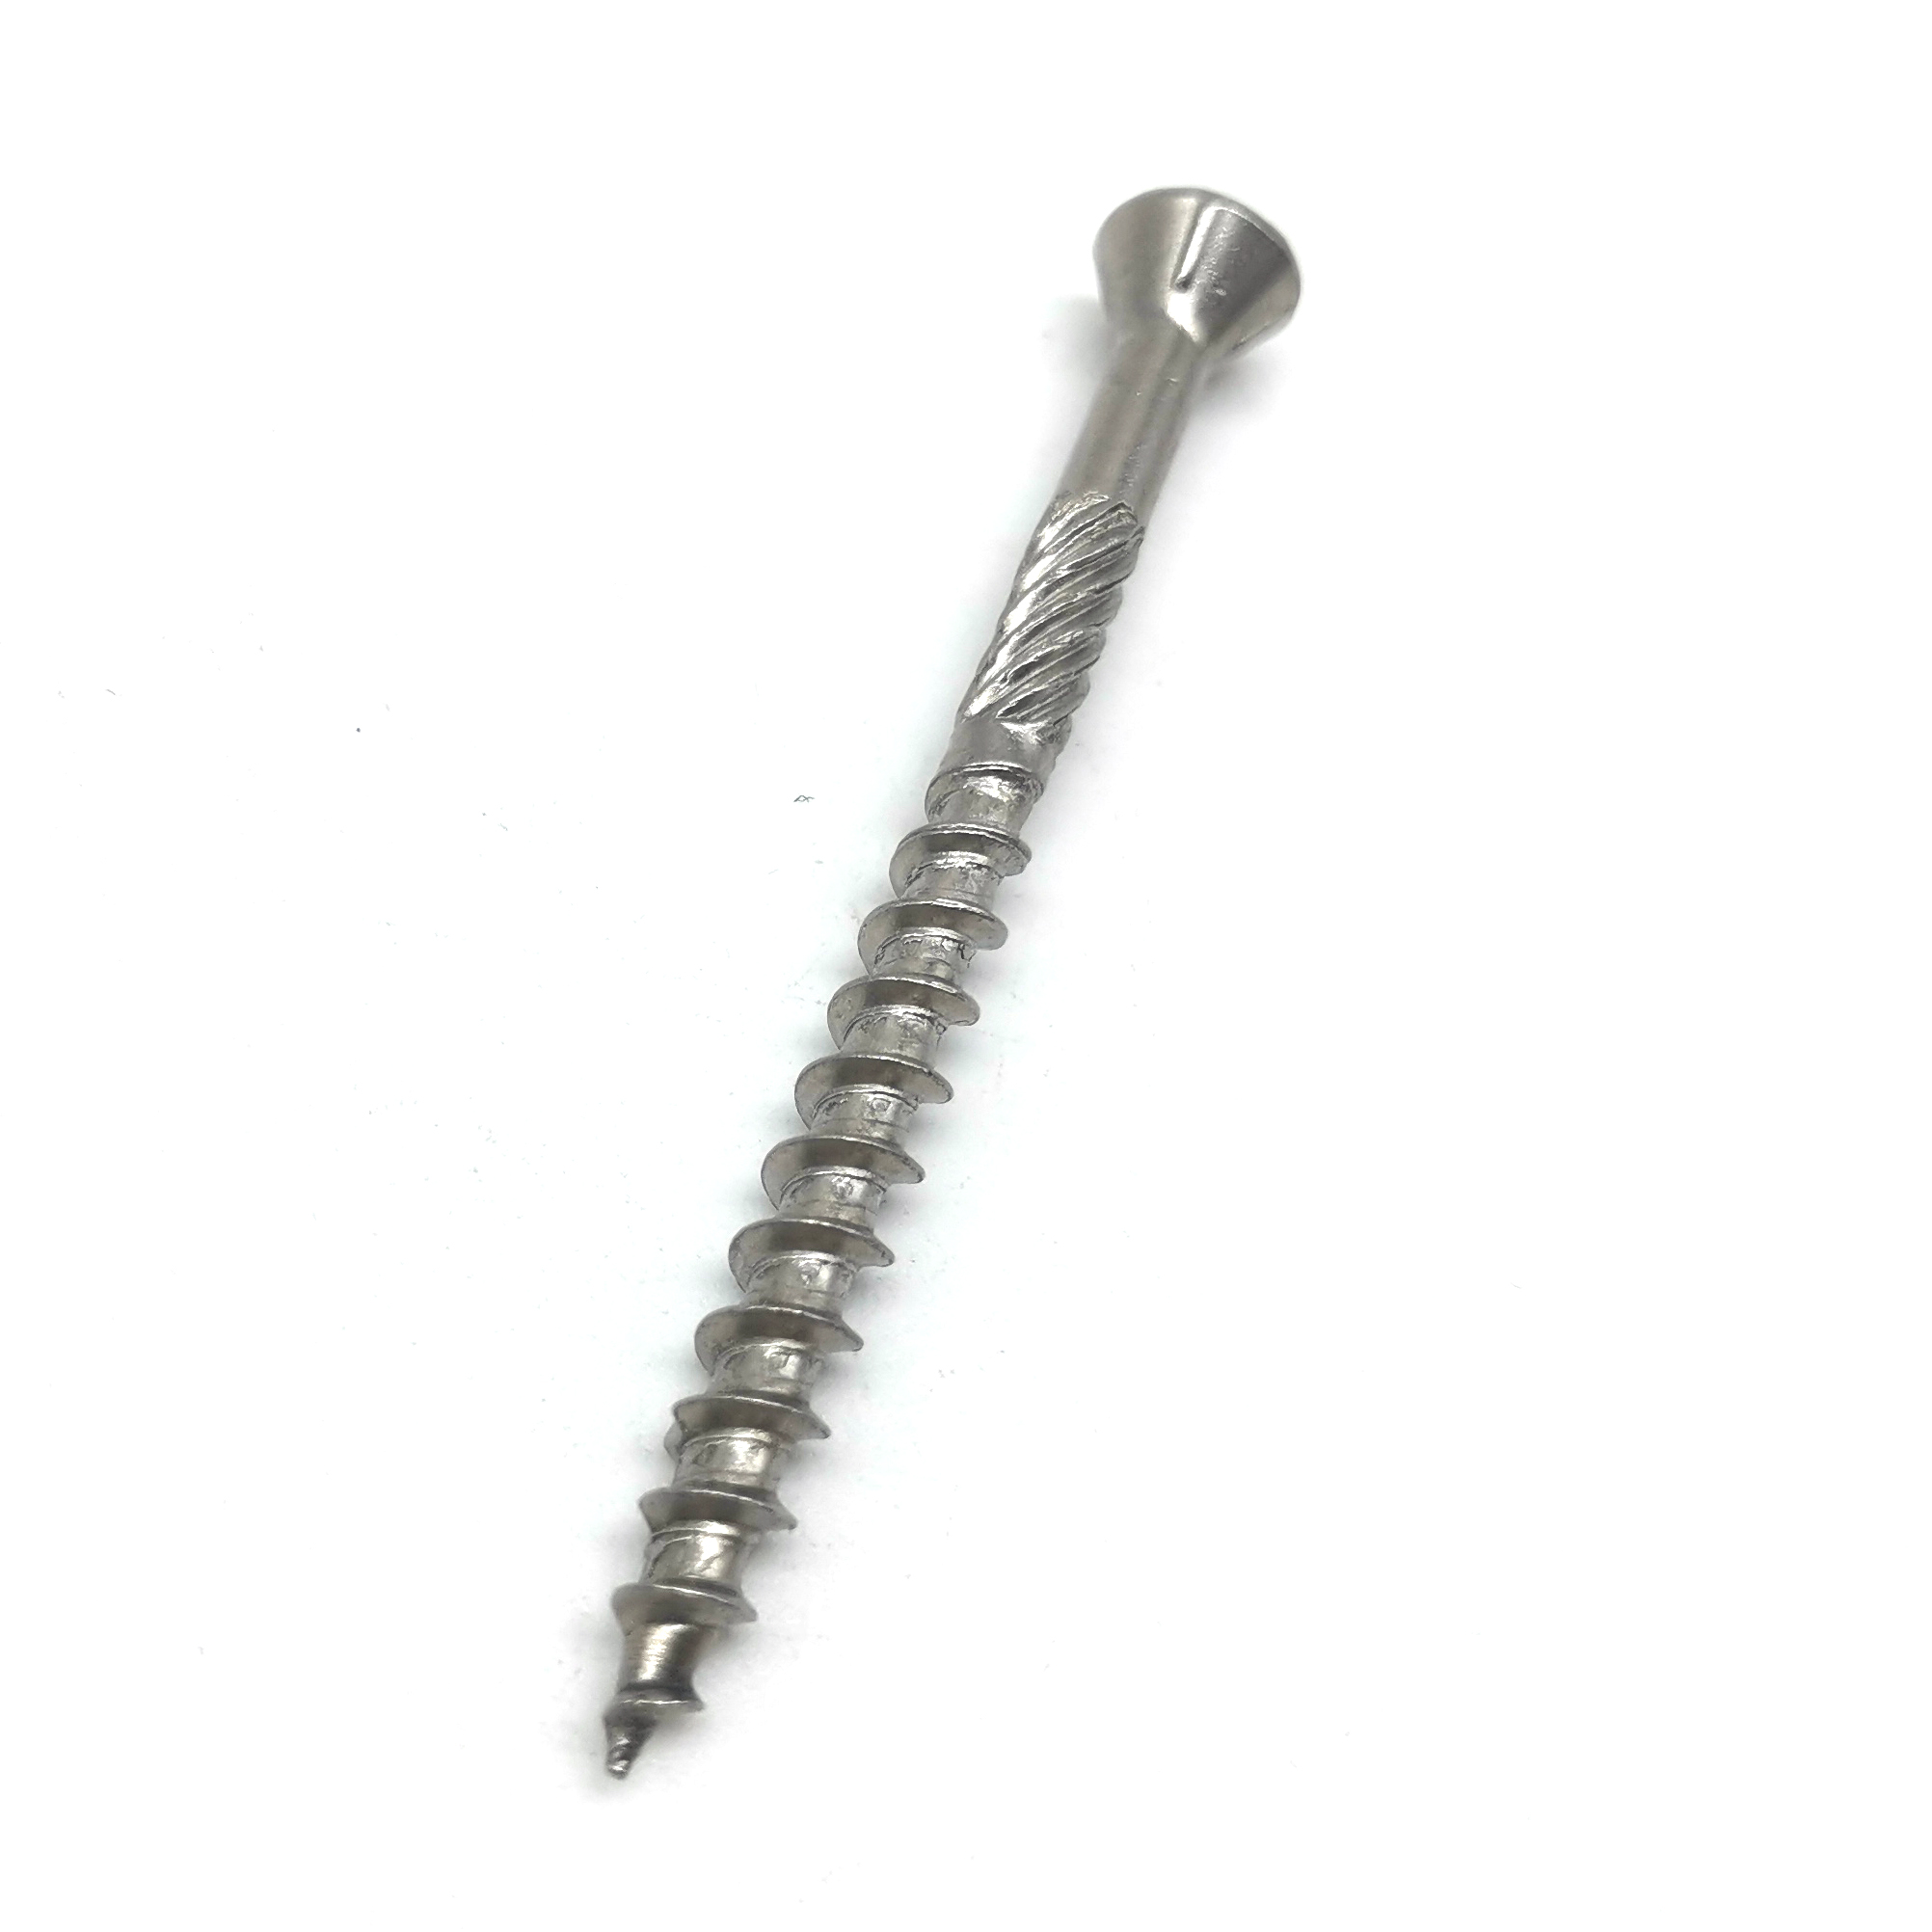 A2-70 316 M8 Hex Stainless Steel Hardware Machine Bolts And Nuts Self Tapping Screw